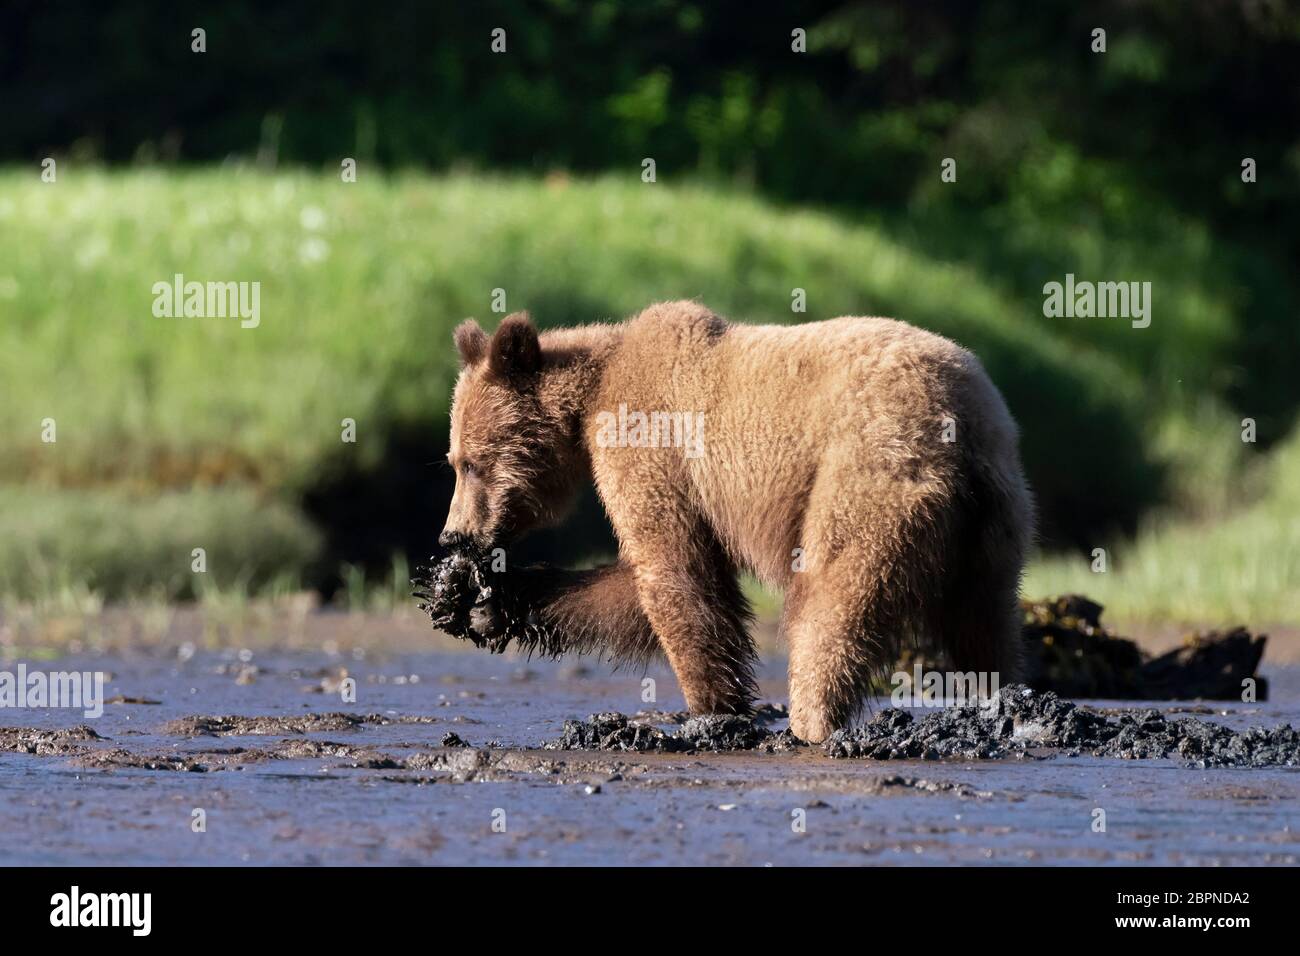 Grizzly bear removing shell from clam with its claws, Khutzeymateen Inlet, BC Stock Photo